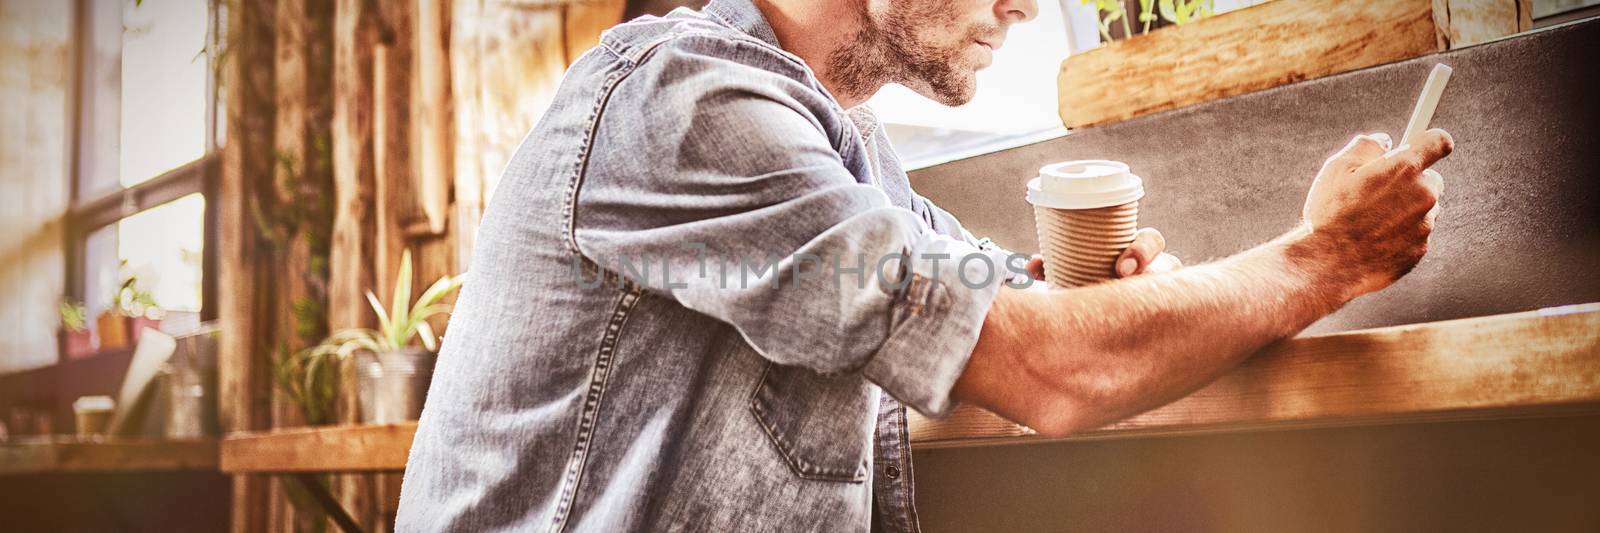 Man using a smartphone in the cafe